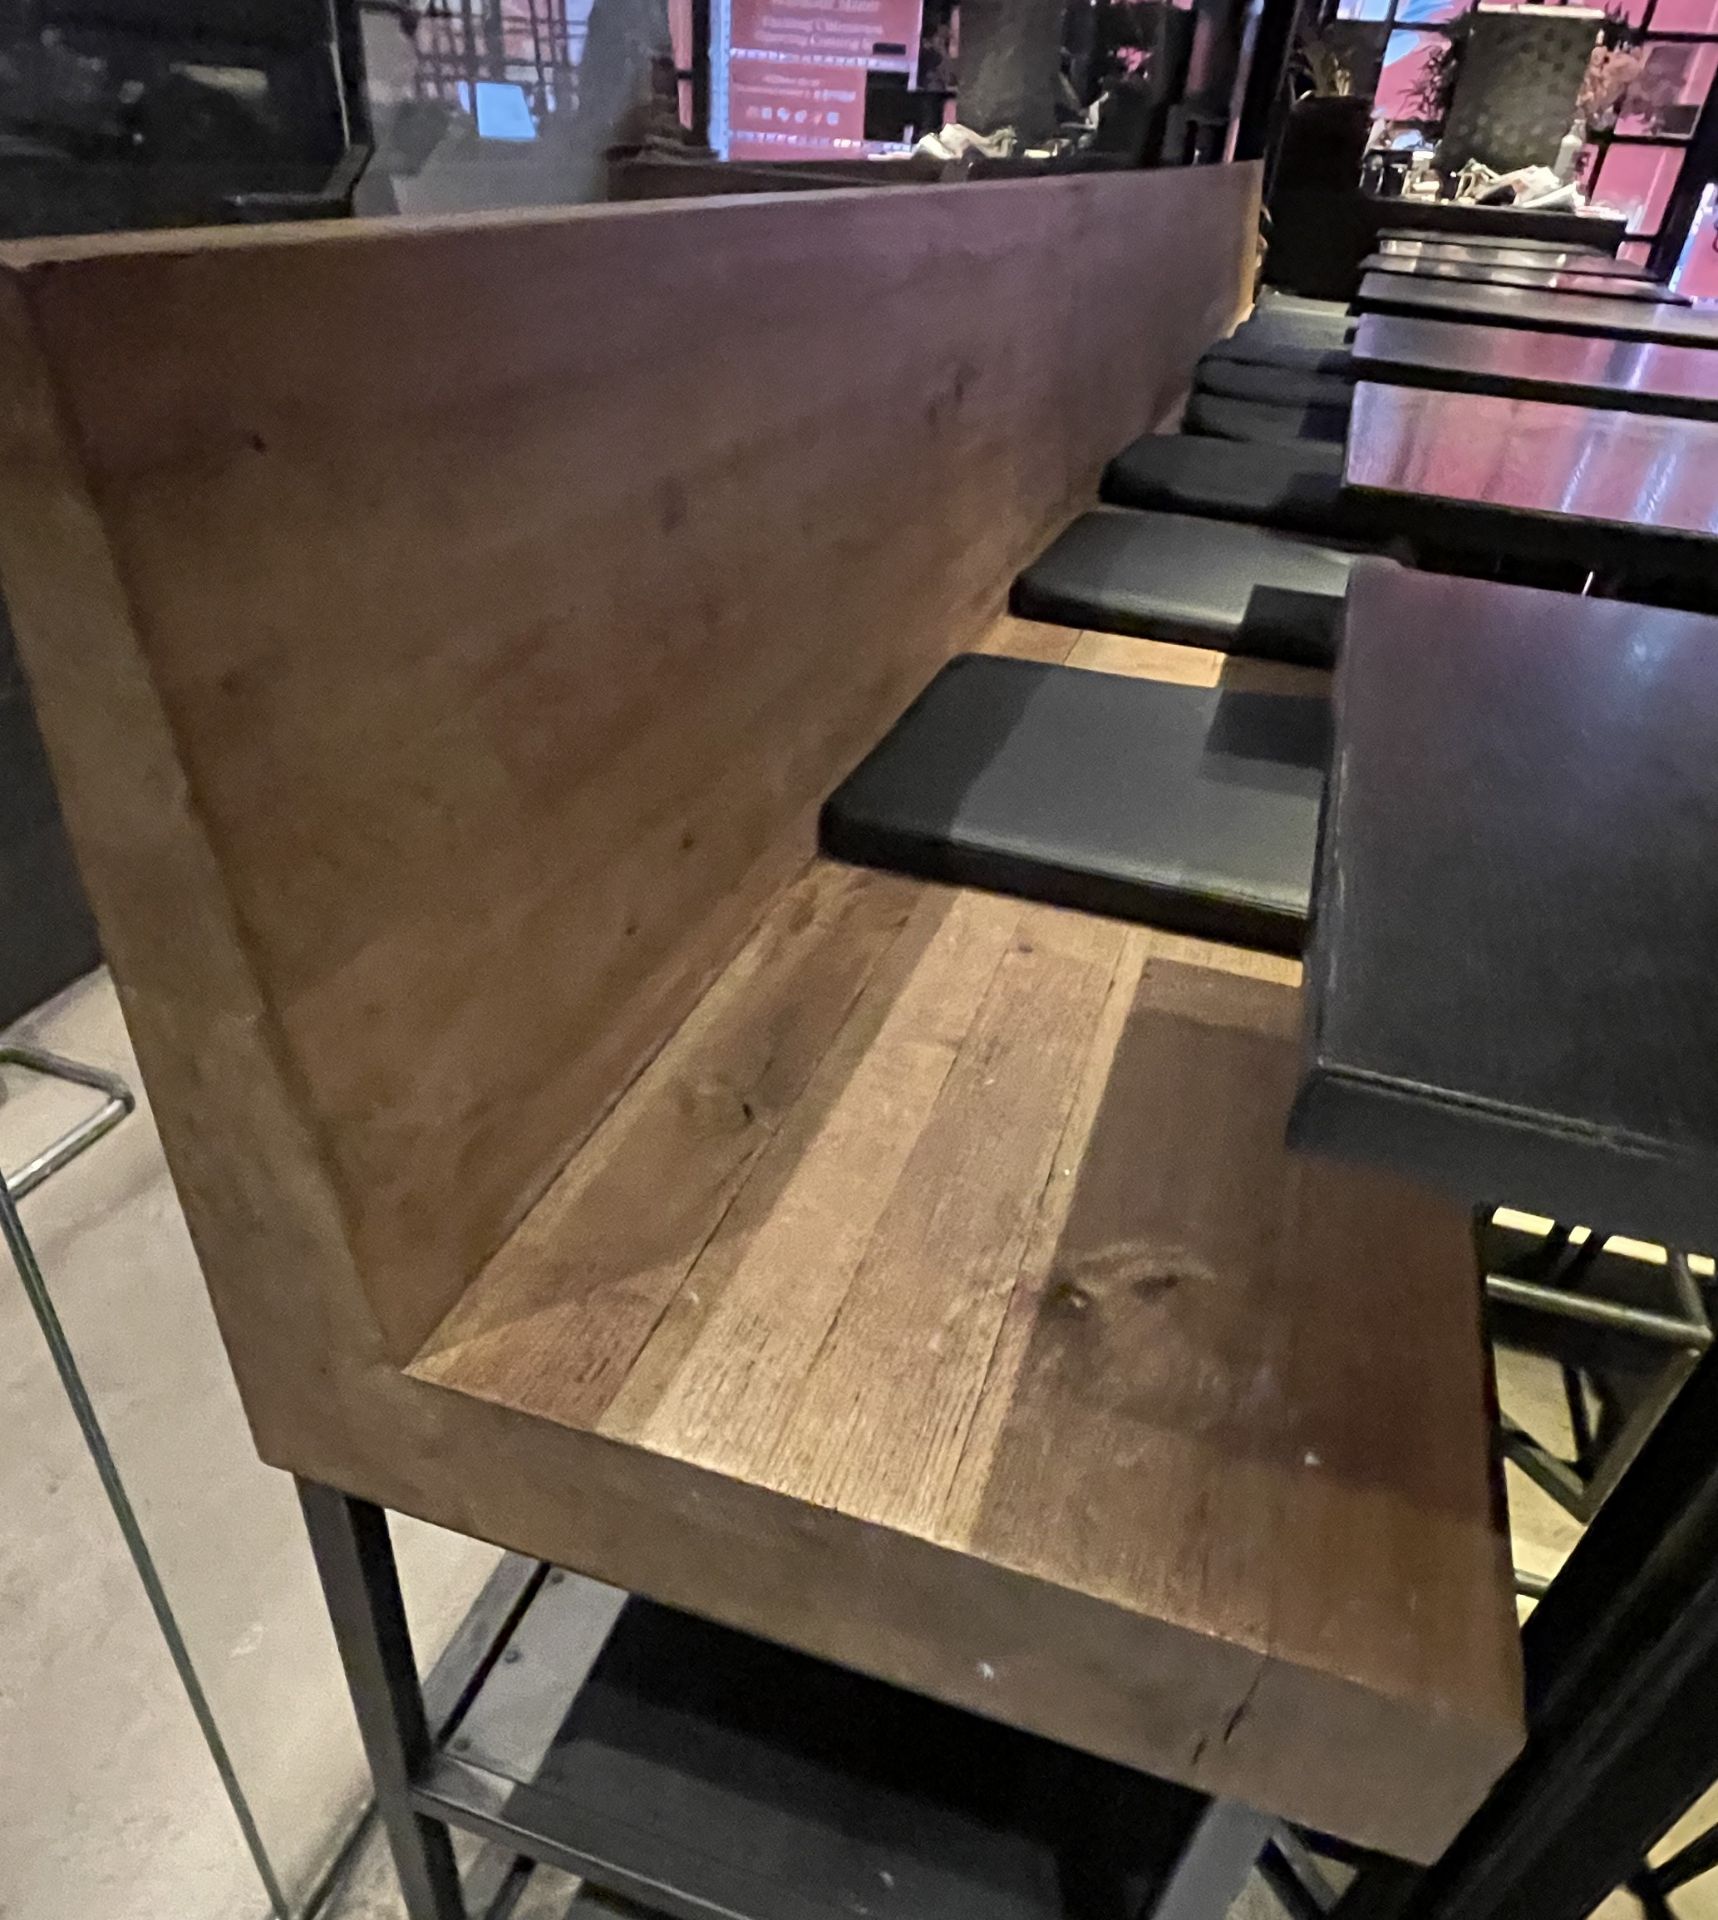 1 x Raised Industrial Style Seating Bench Featuring a Fabricated Steel Base with Footrests - Image 13 of 13